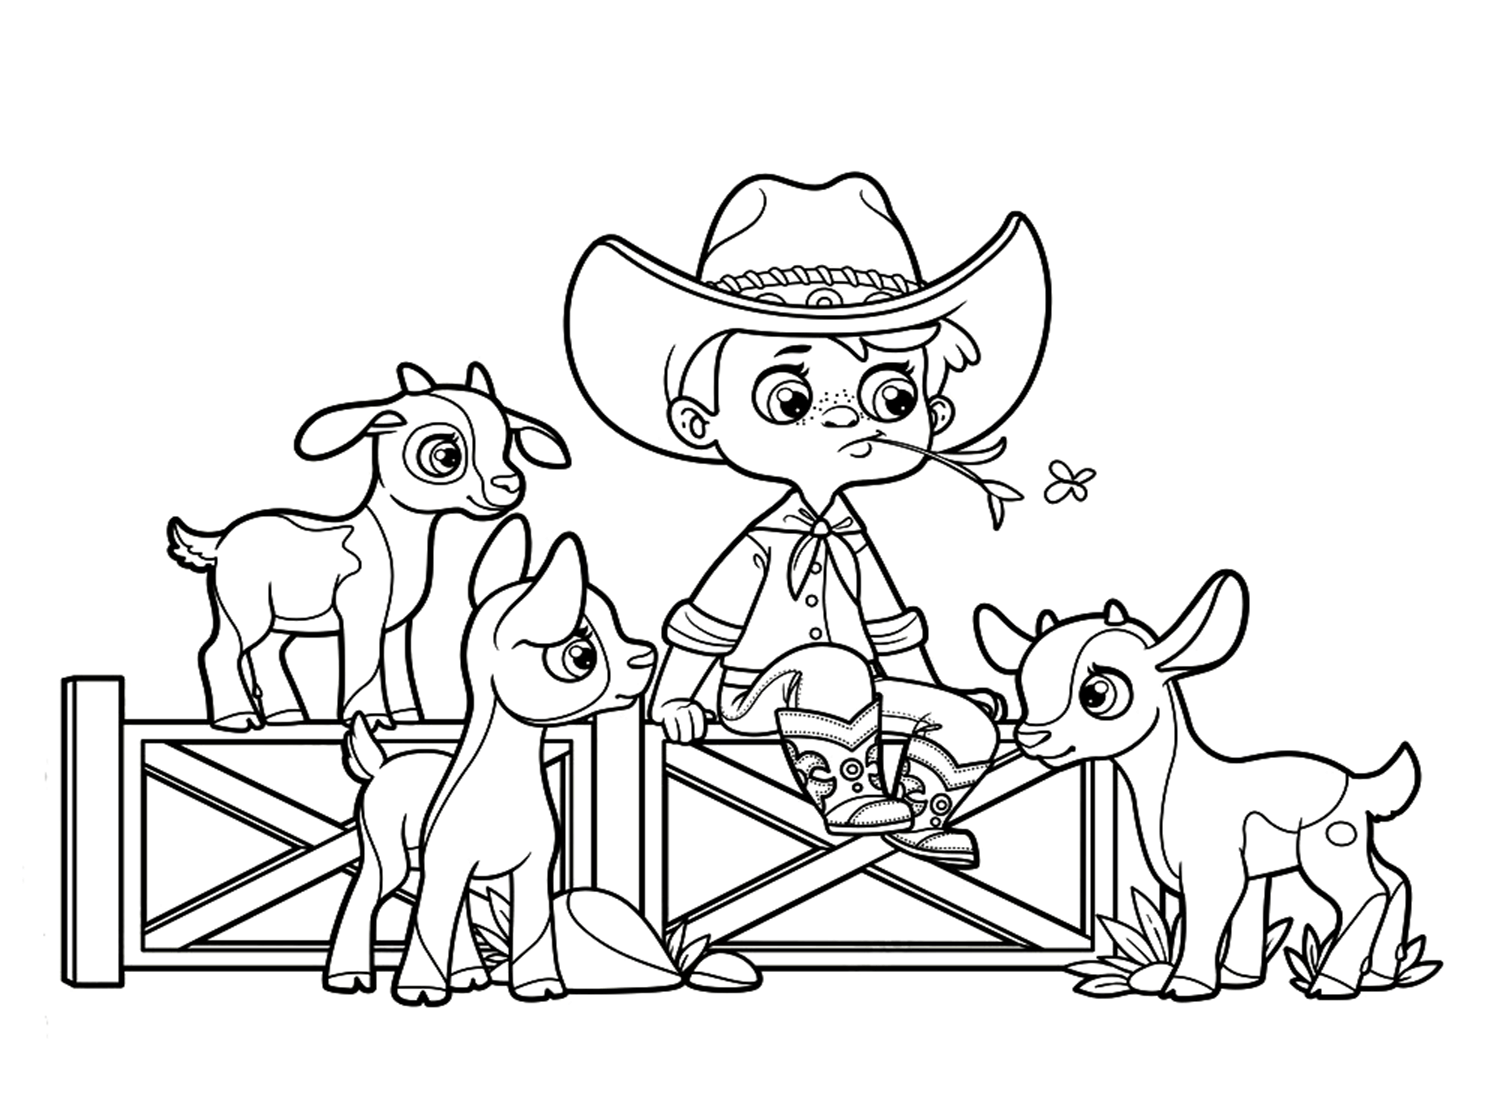 Cow Boy Boots Coloring Page